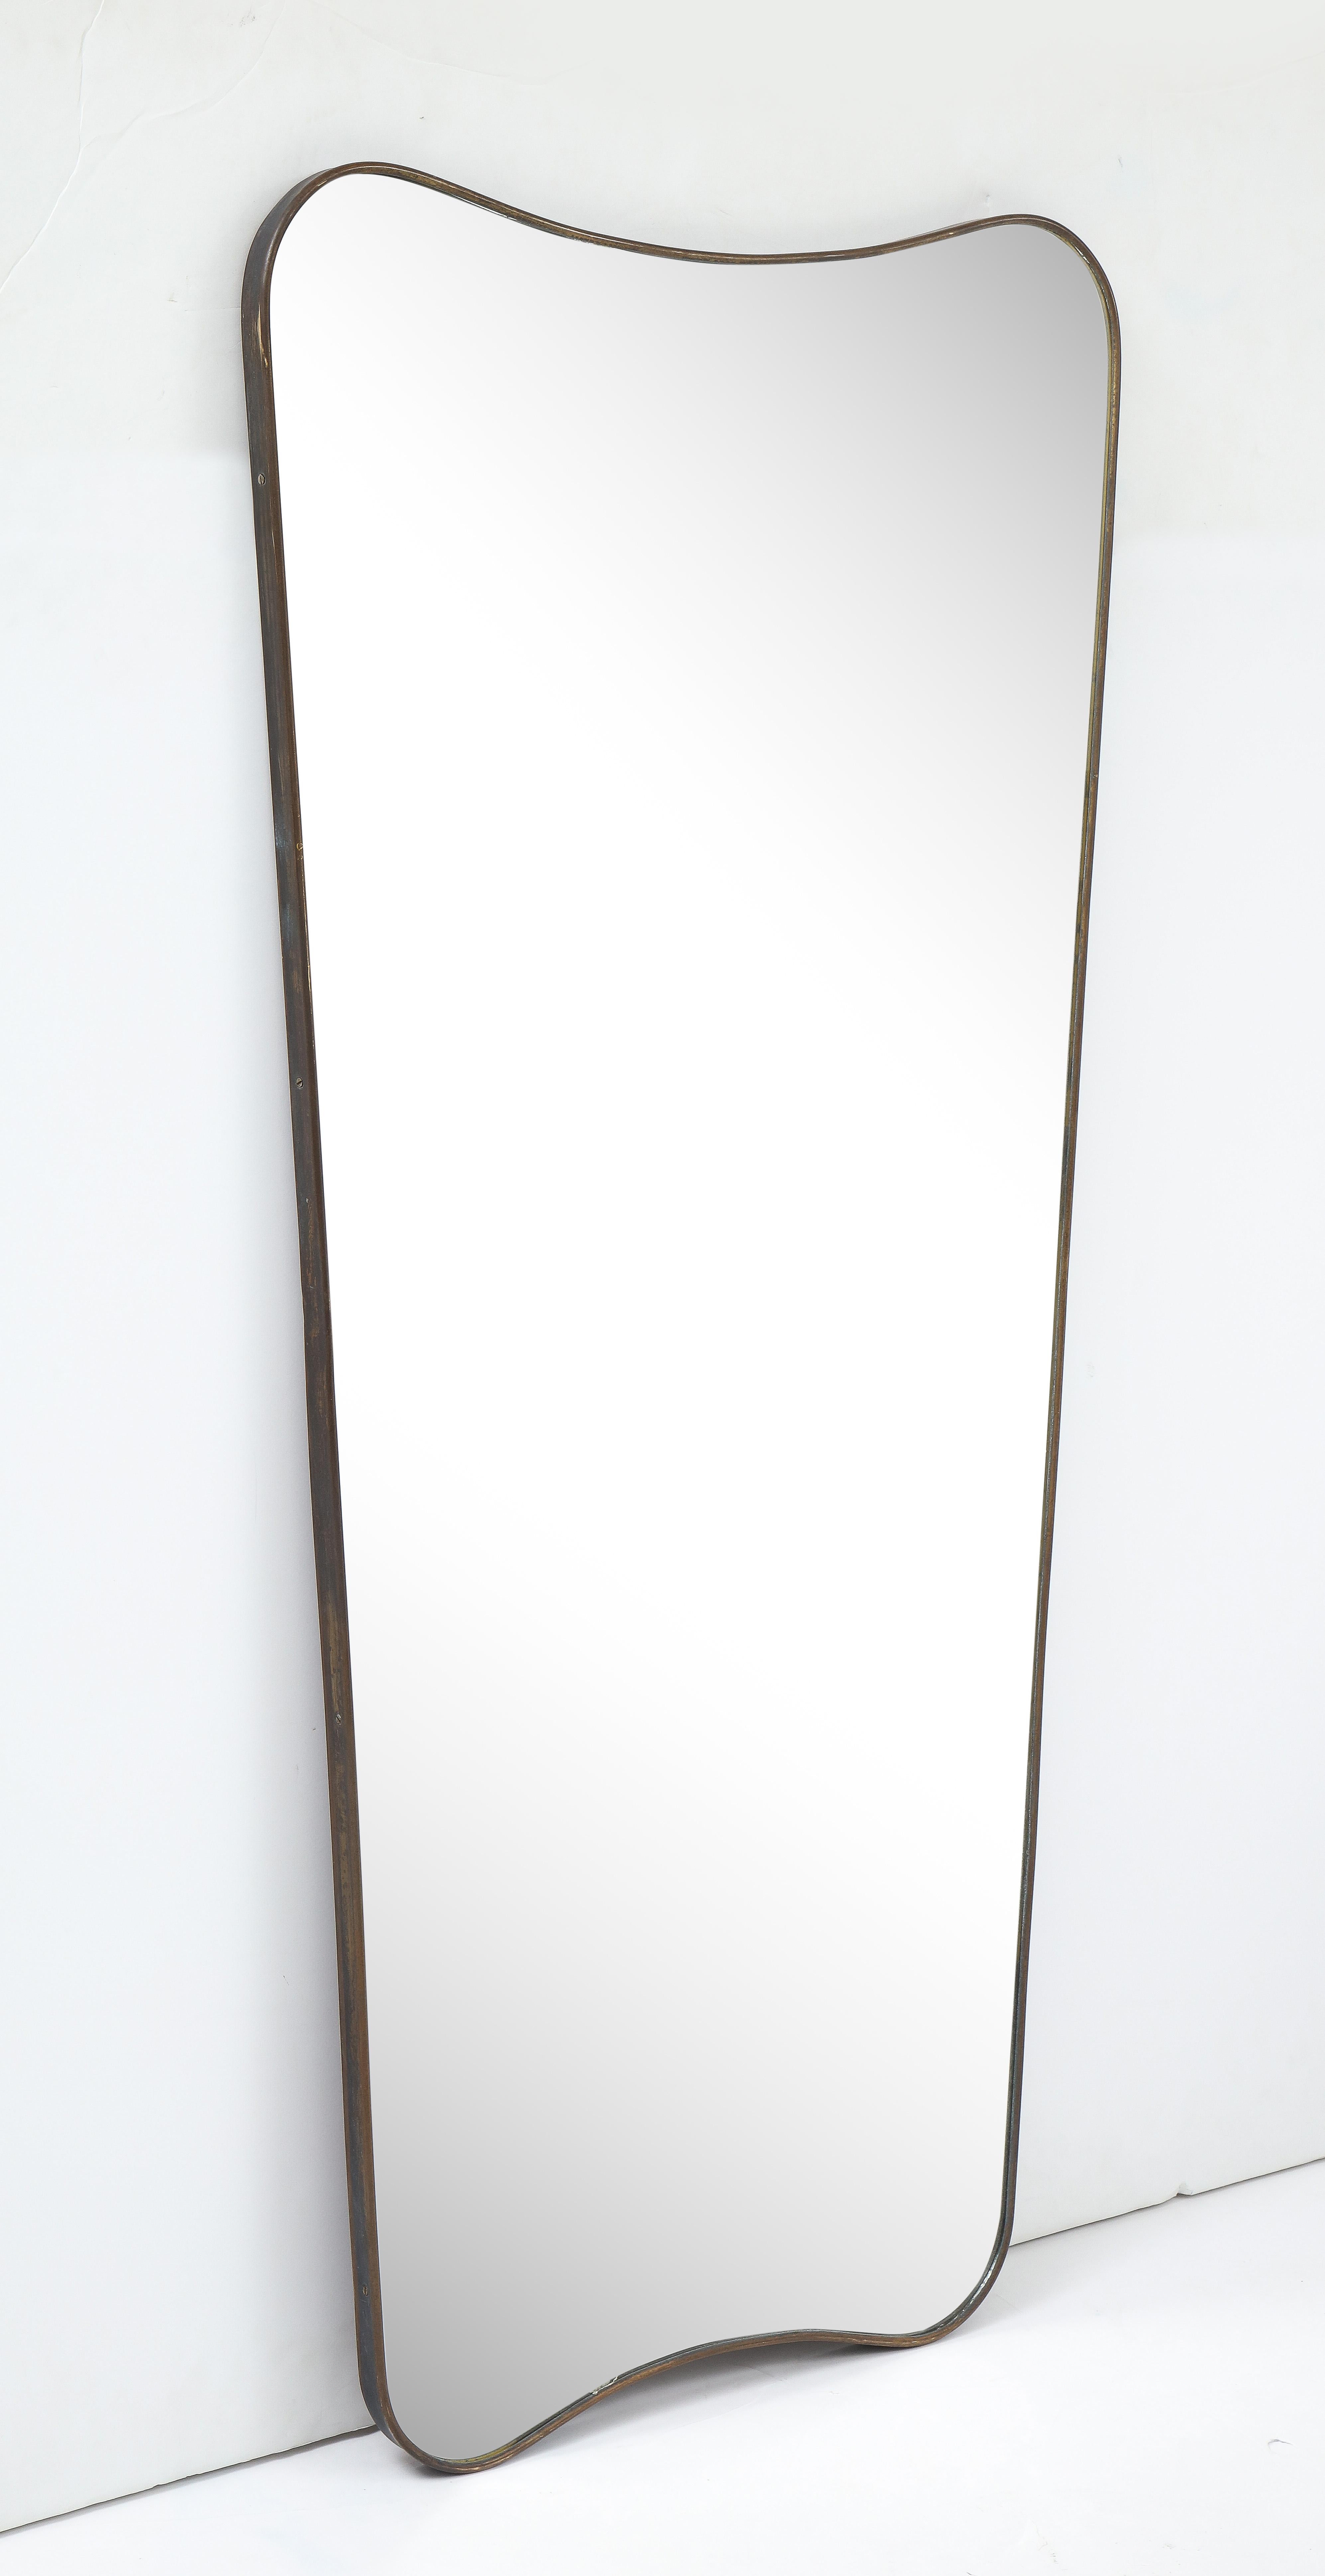 Modernist Italian 1950's Brass Shaped Mirror In Good Condition For Sale In New York, NY